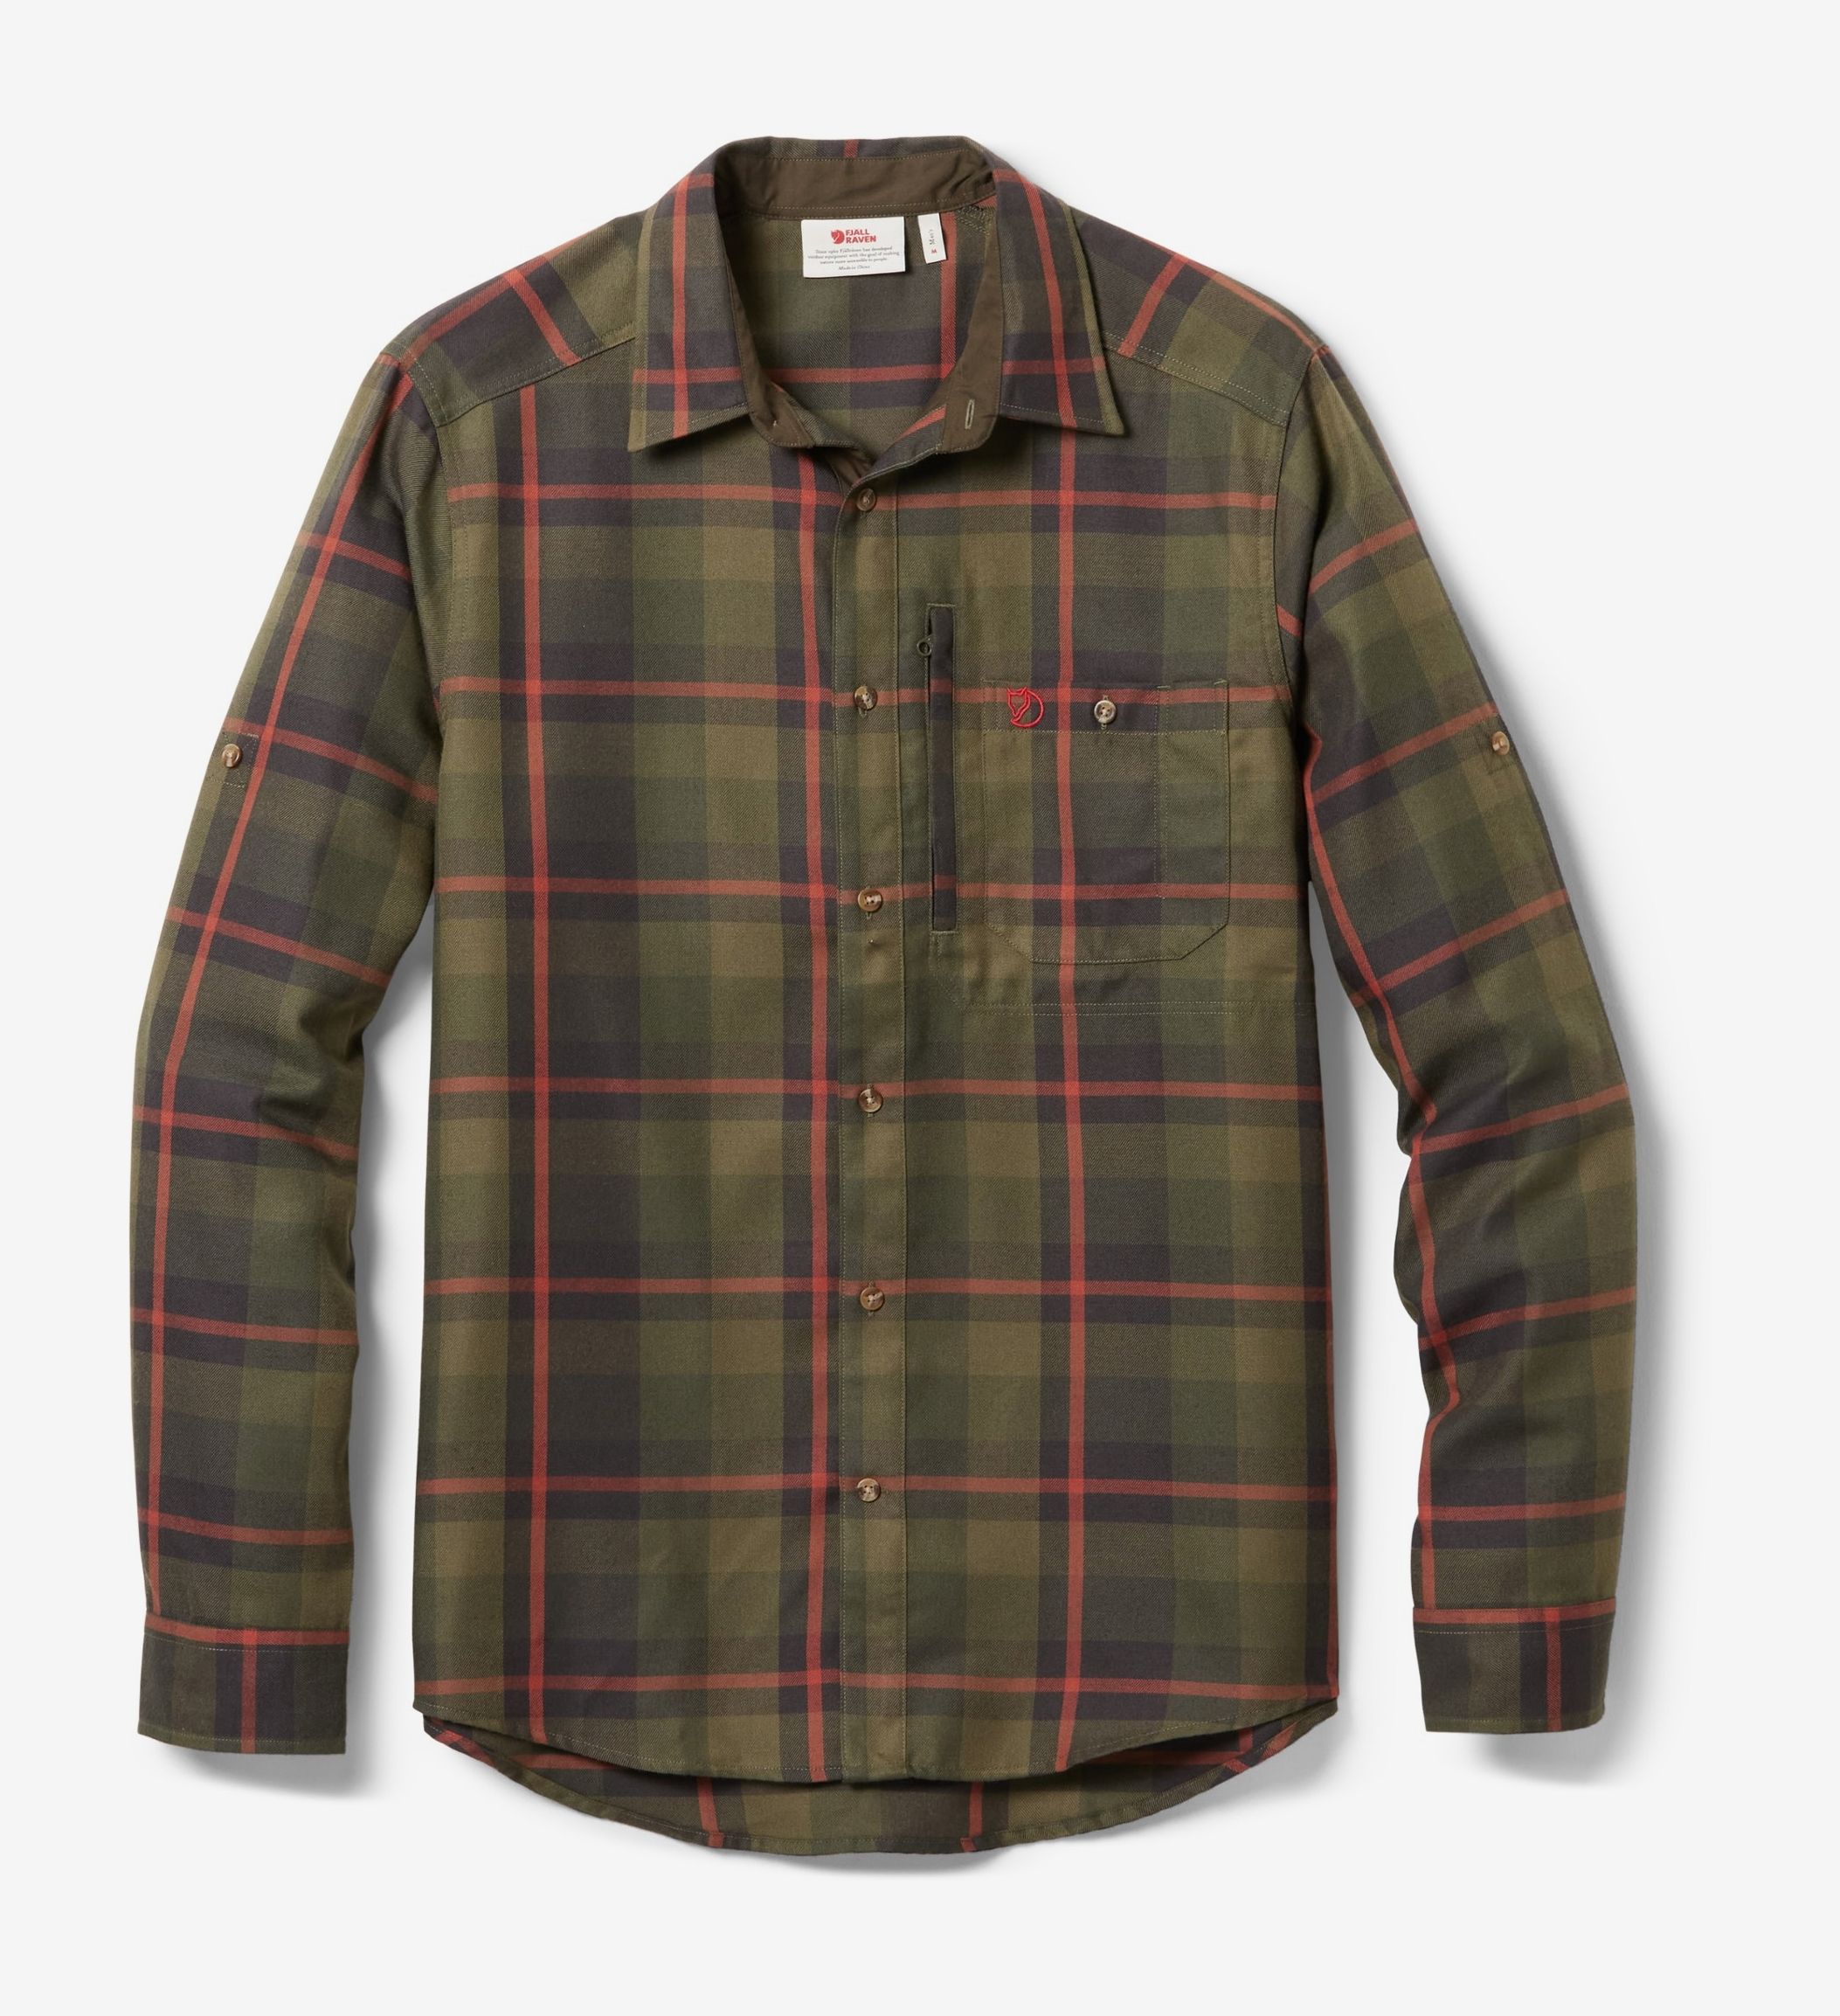 Flannel shirt worn by Frank (Murray Bartlett) as seen in The Last of Us TV  series outfits (Season 1 Episode 3)